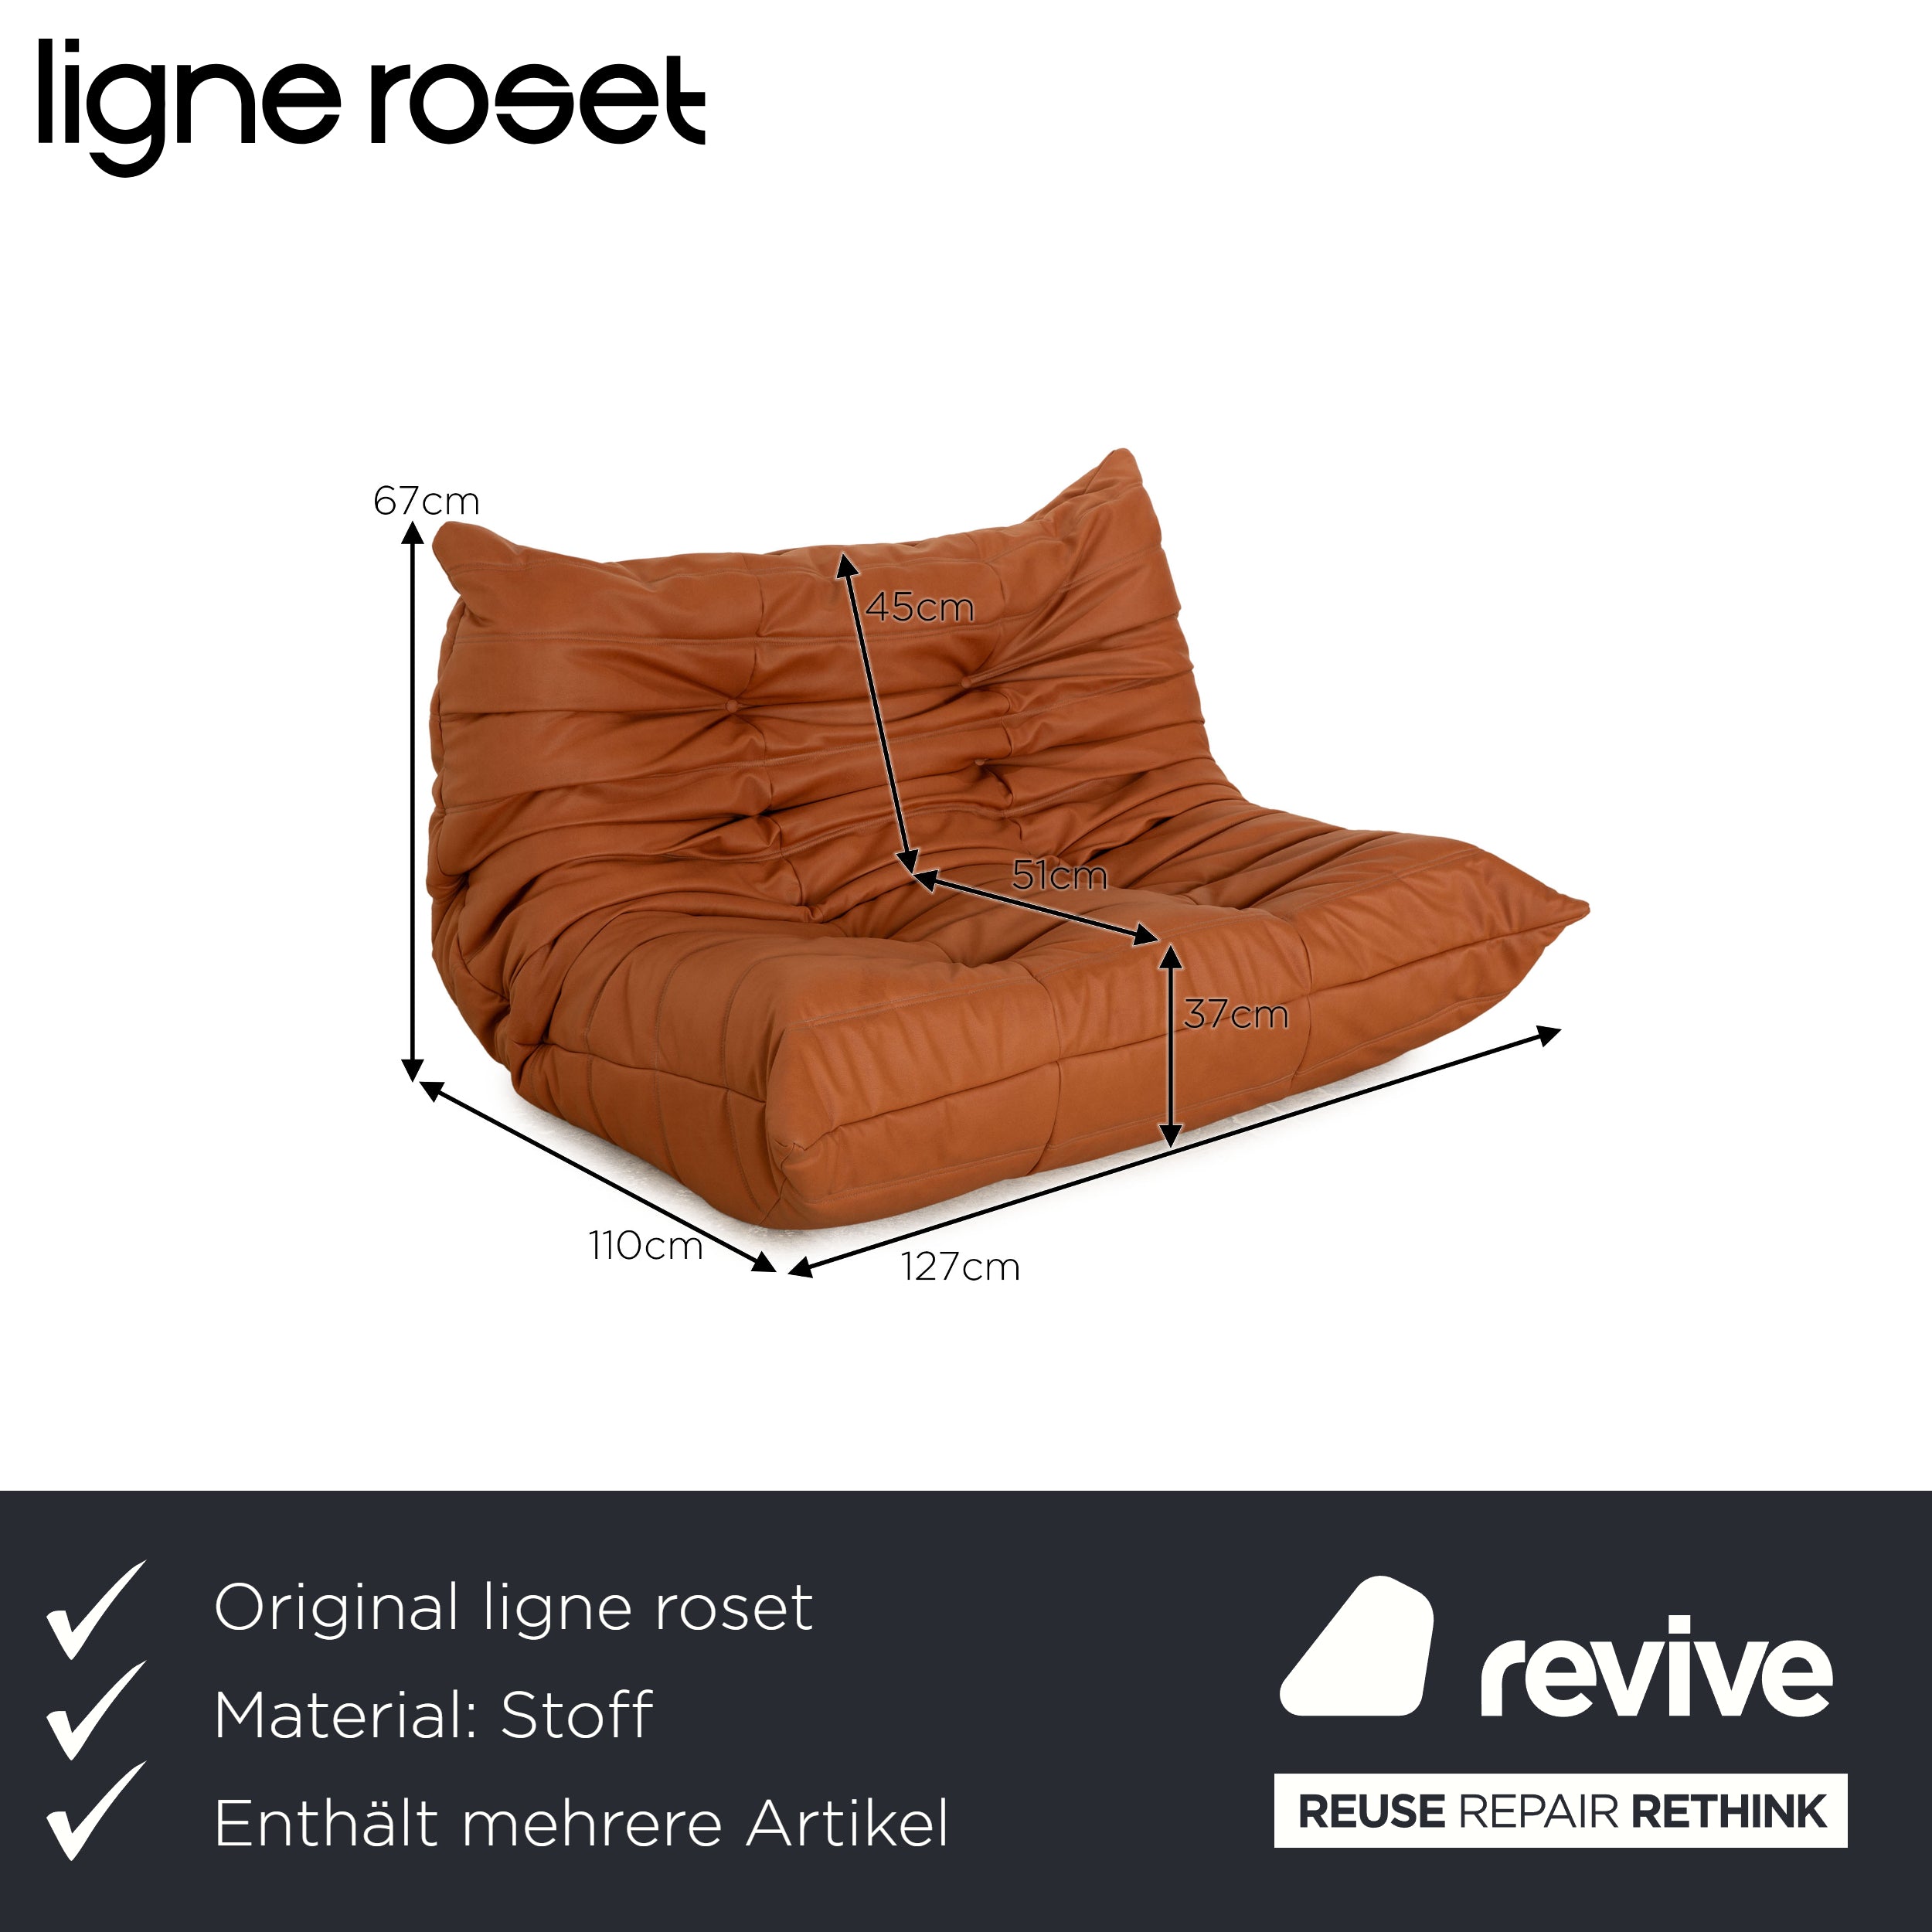 ligne roset Togo fabric sofa set brown armchair stool two-seater new cover camel microfiber